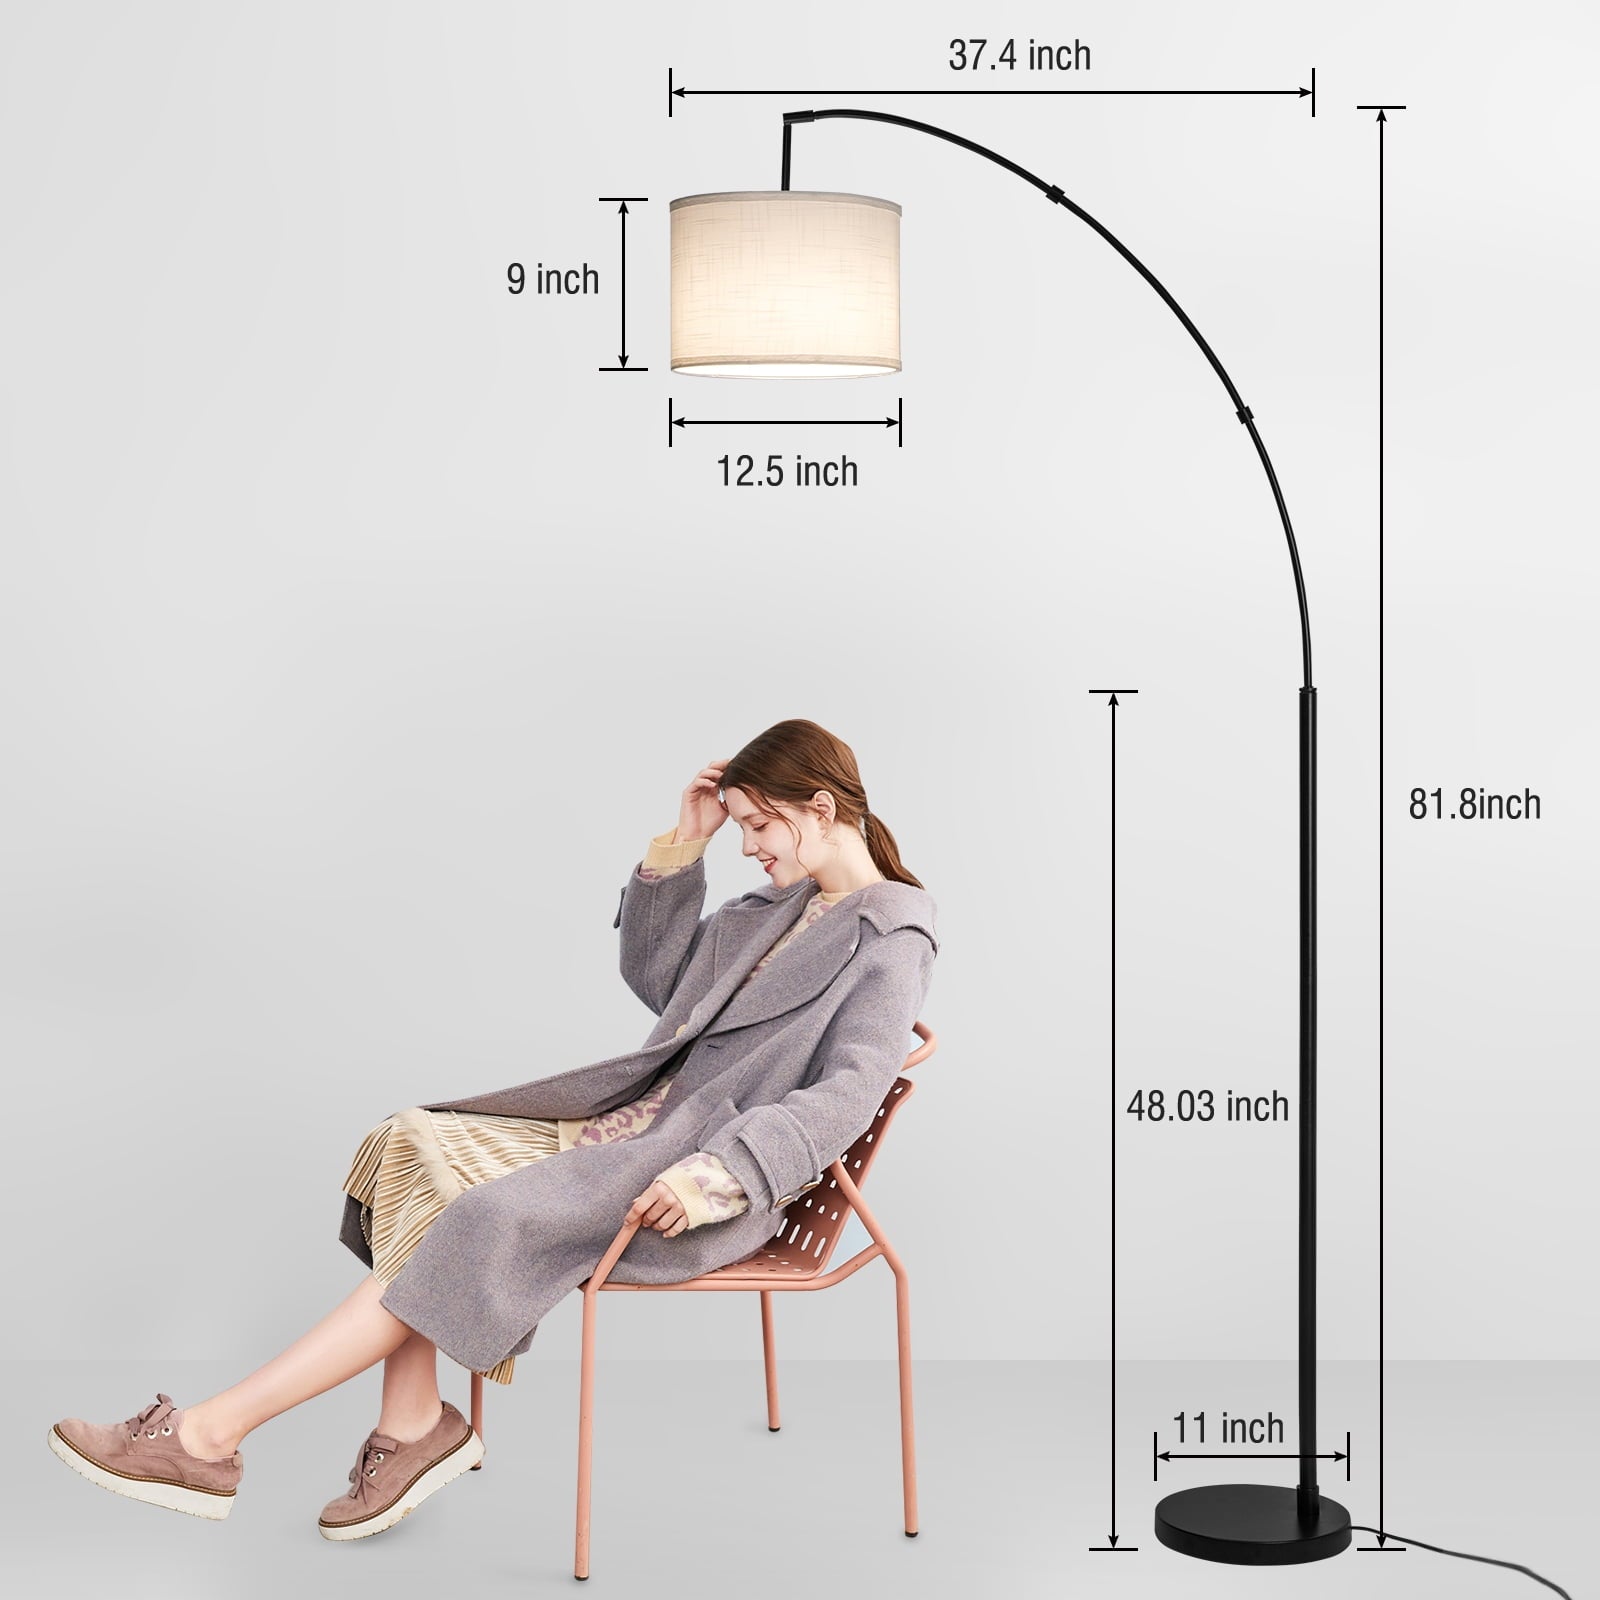 Outon 81" Arc Floor Lamp, 4CCT LED Modern Floor Lamps with 360° Rotatable Hanging Linen Shade Standing Lamps for Living Room, Bedroom